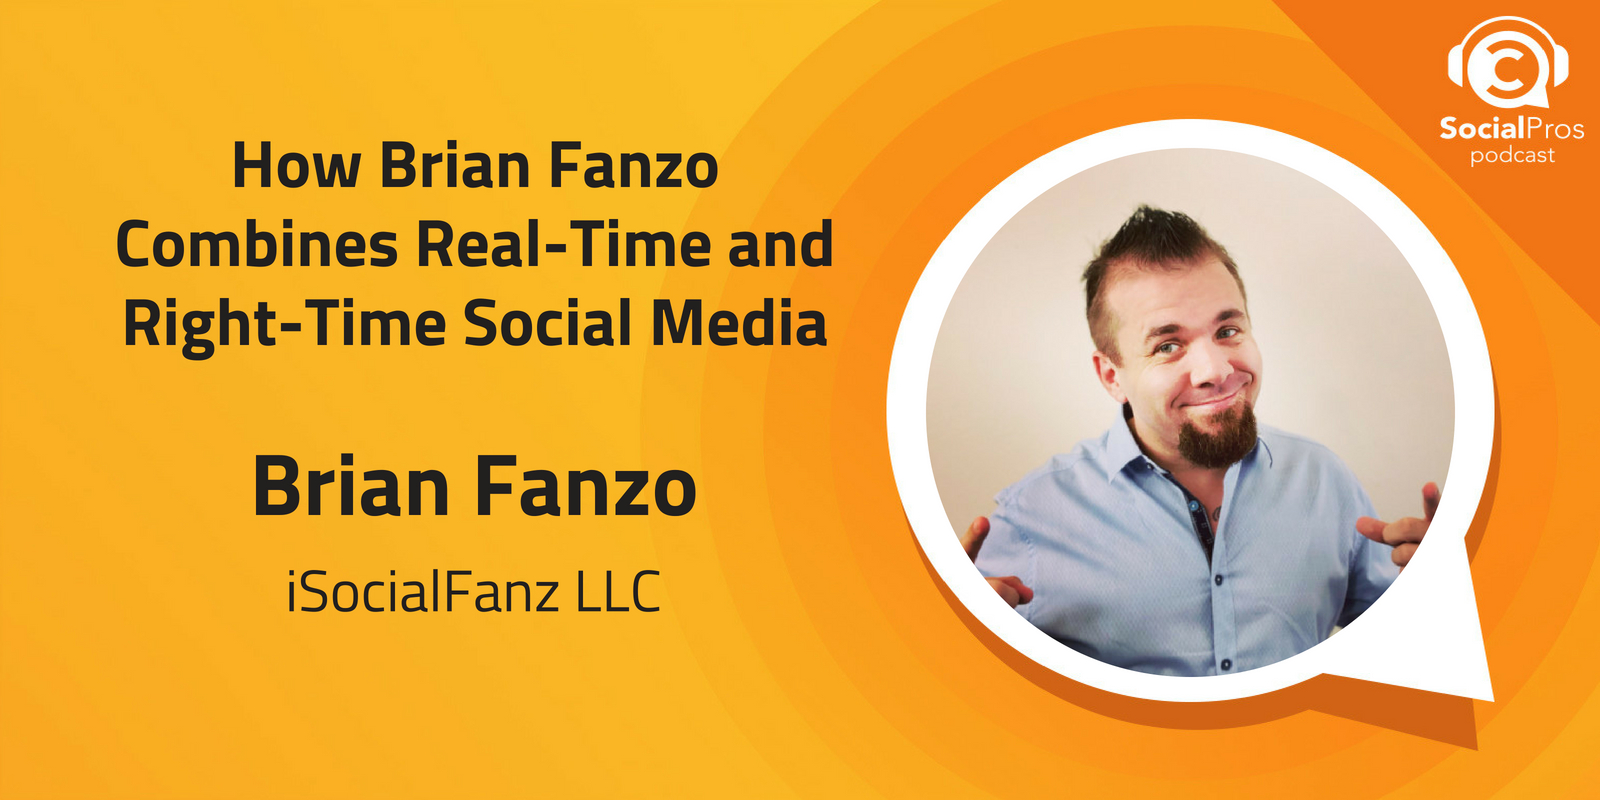 How Brian Fanzo Combines Real-Time and Right-Time Social Media